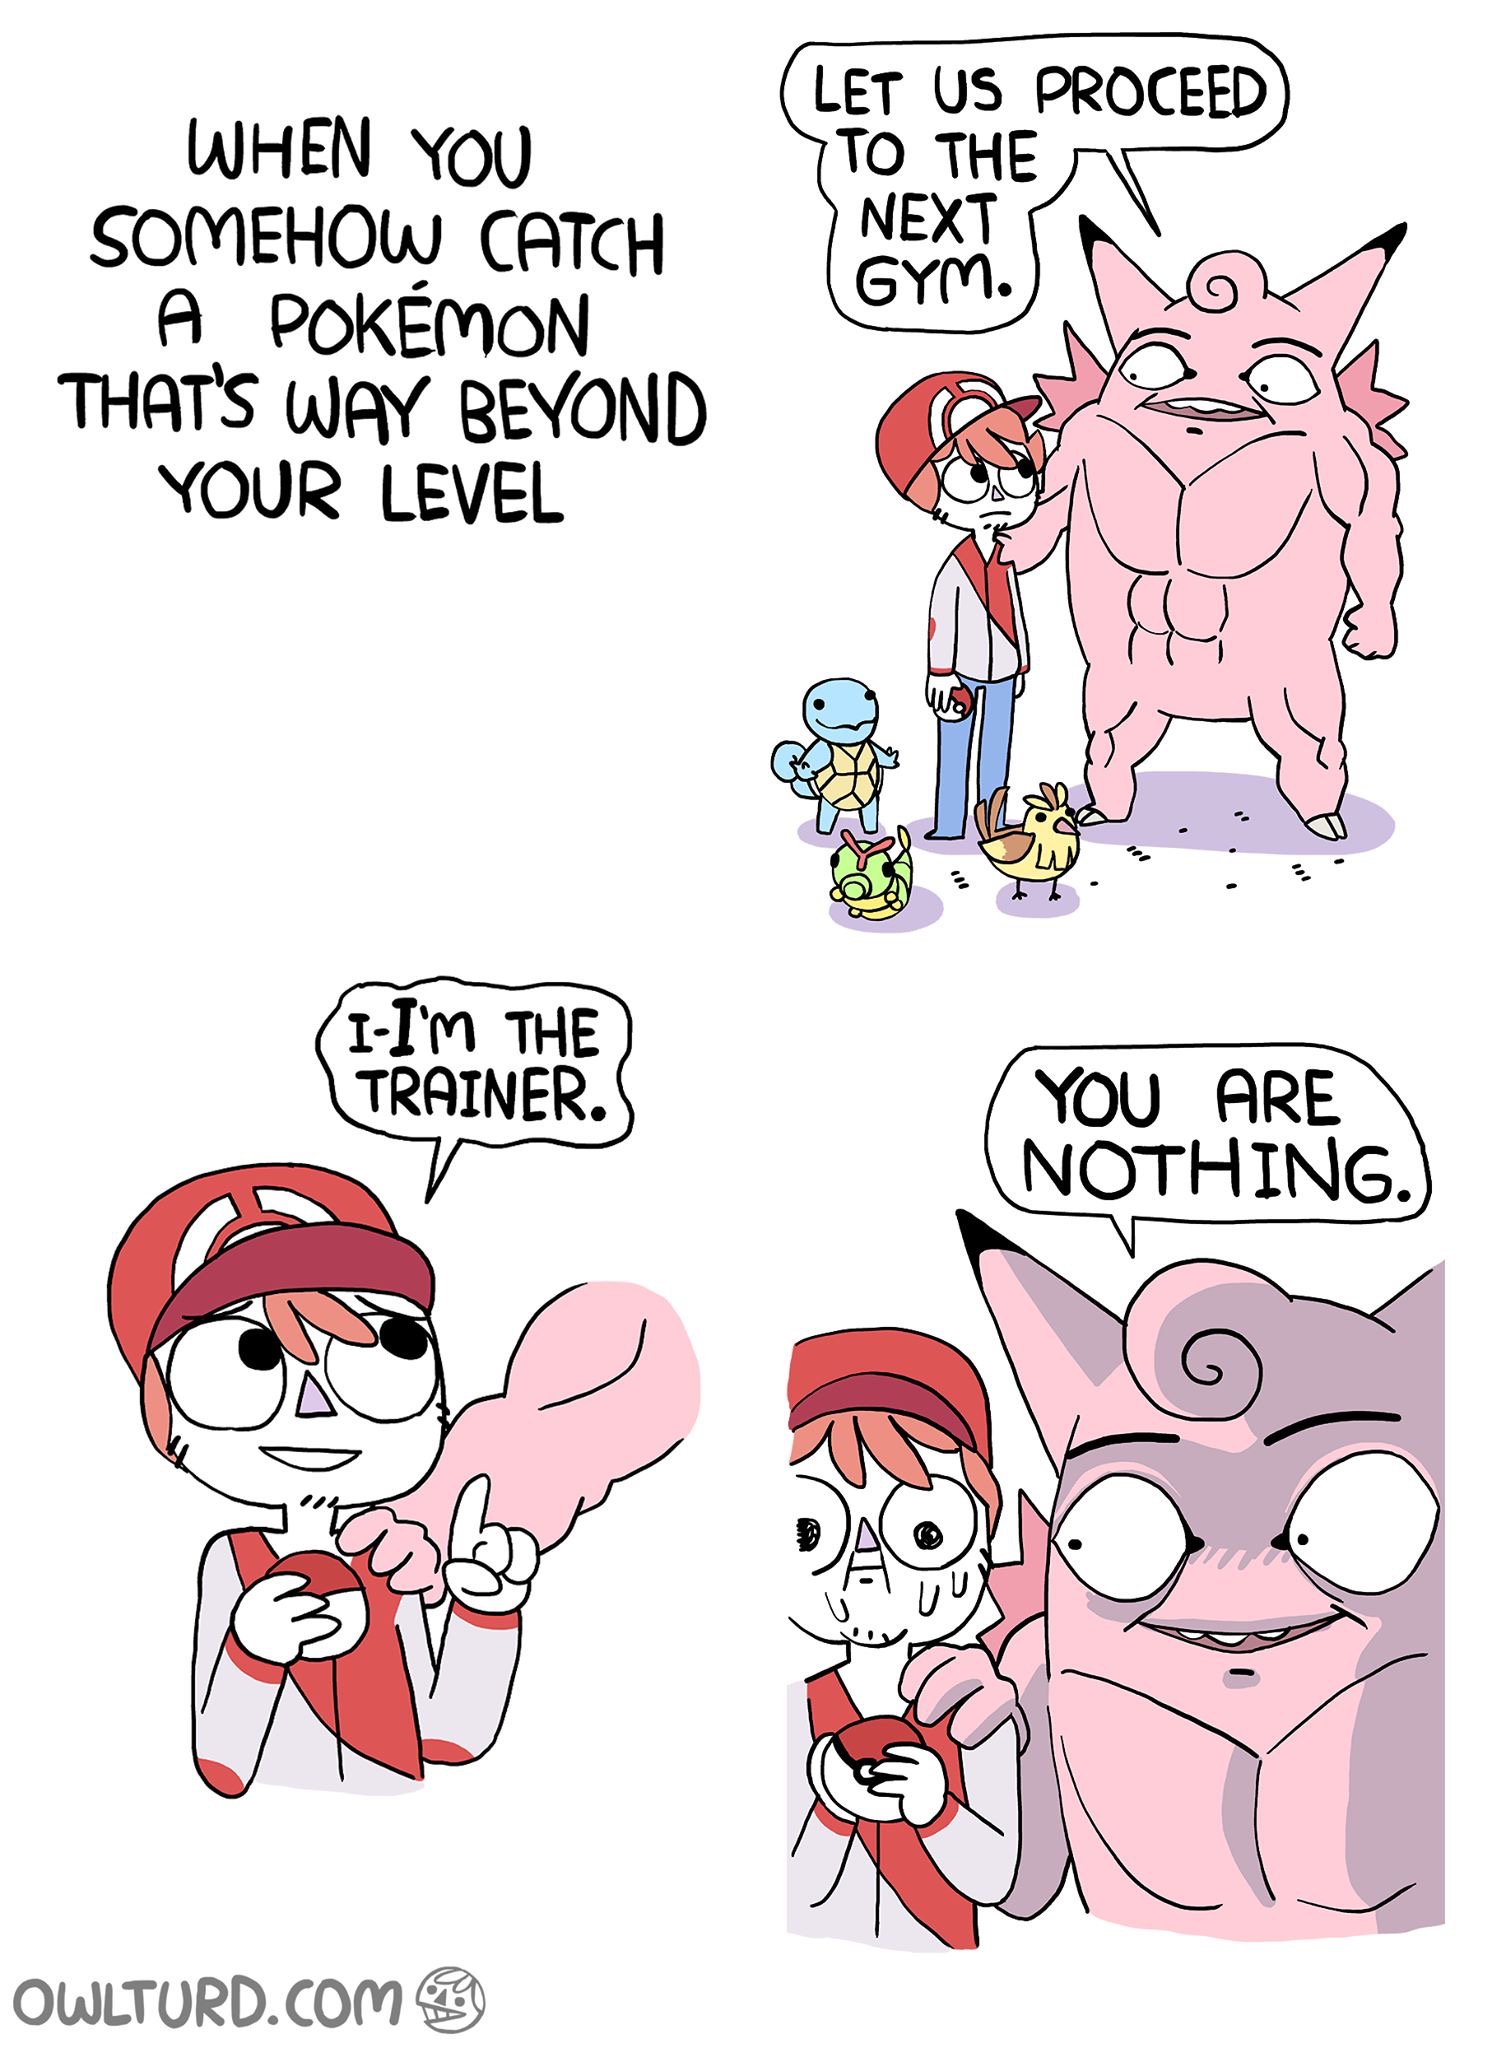 random pic owlturd comics pokemon - Let Us Proceed To The Next Gym. When You Somehow Catch A Pokmon That'S Way Beyond Your Level 1I'M The Trainers You Are Nothing. Owlturd.Com